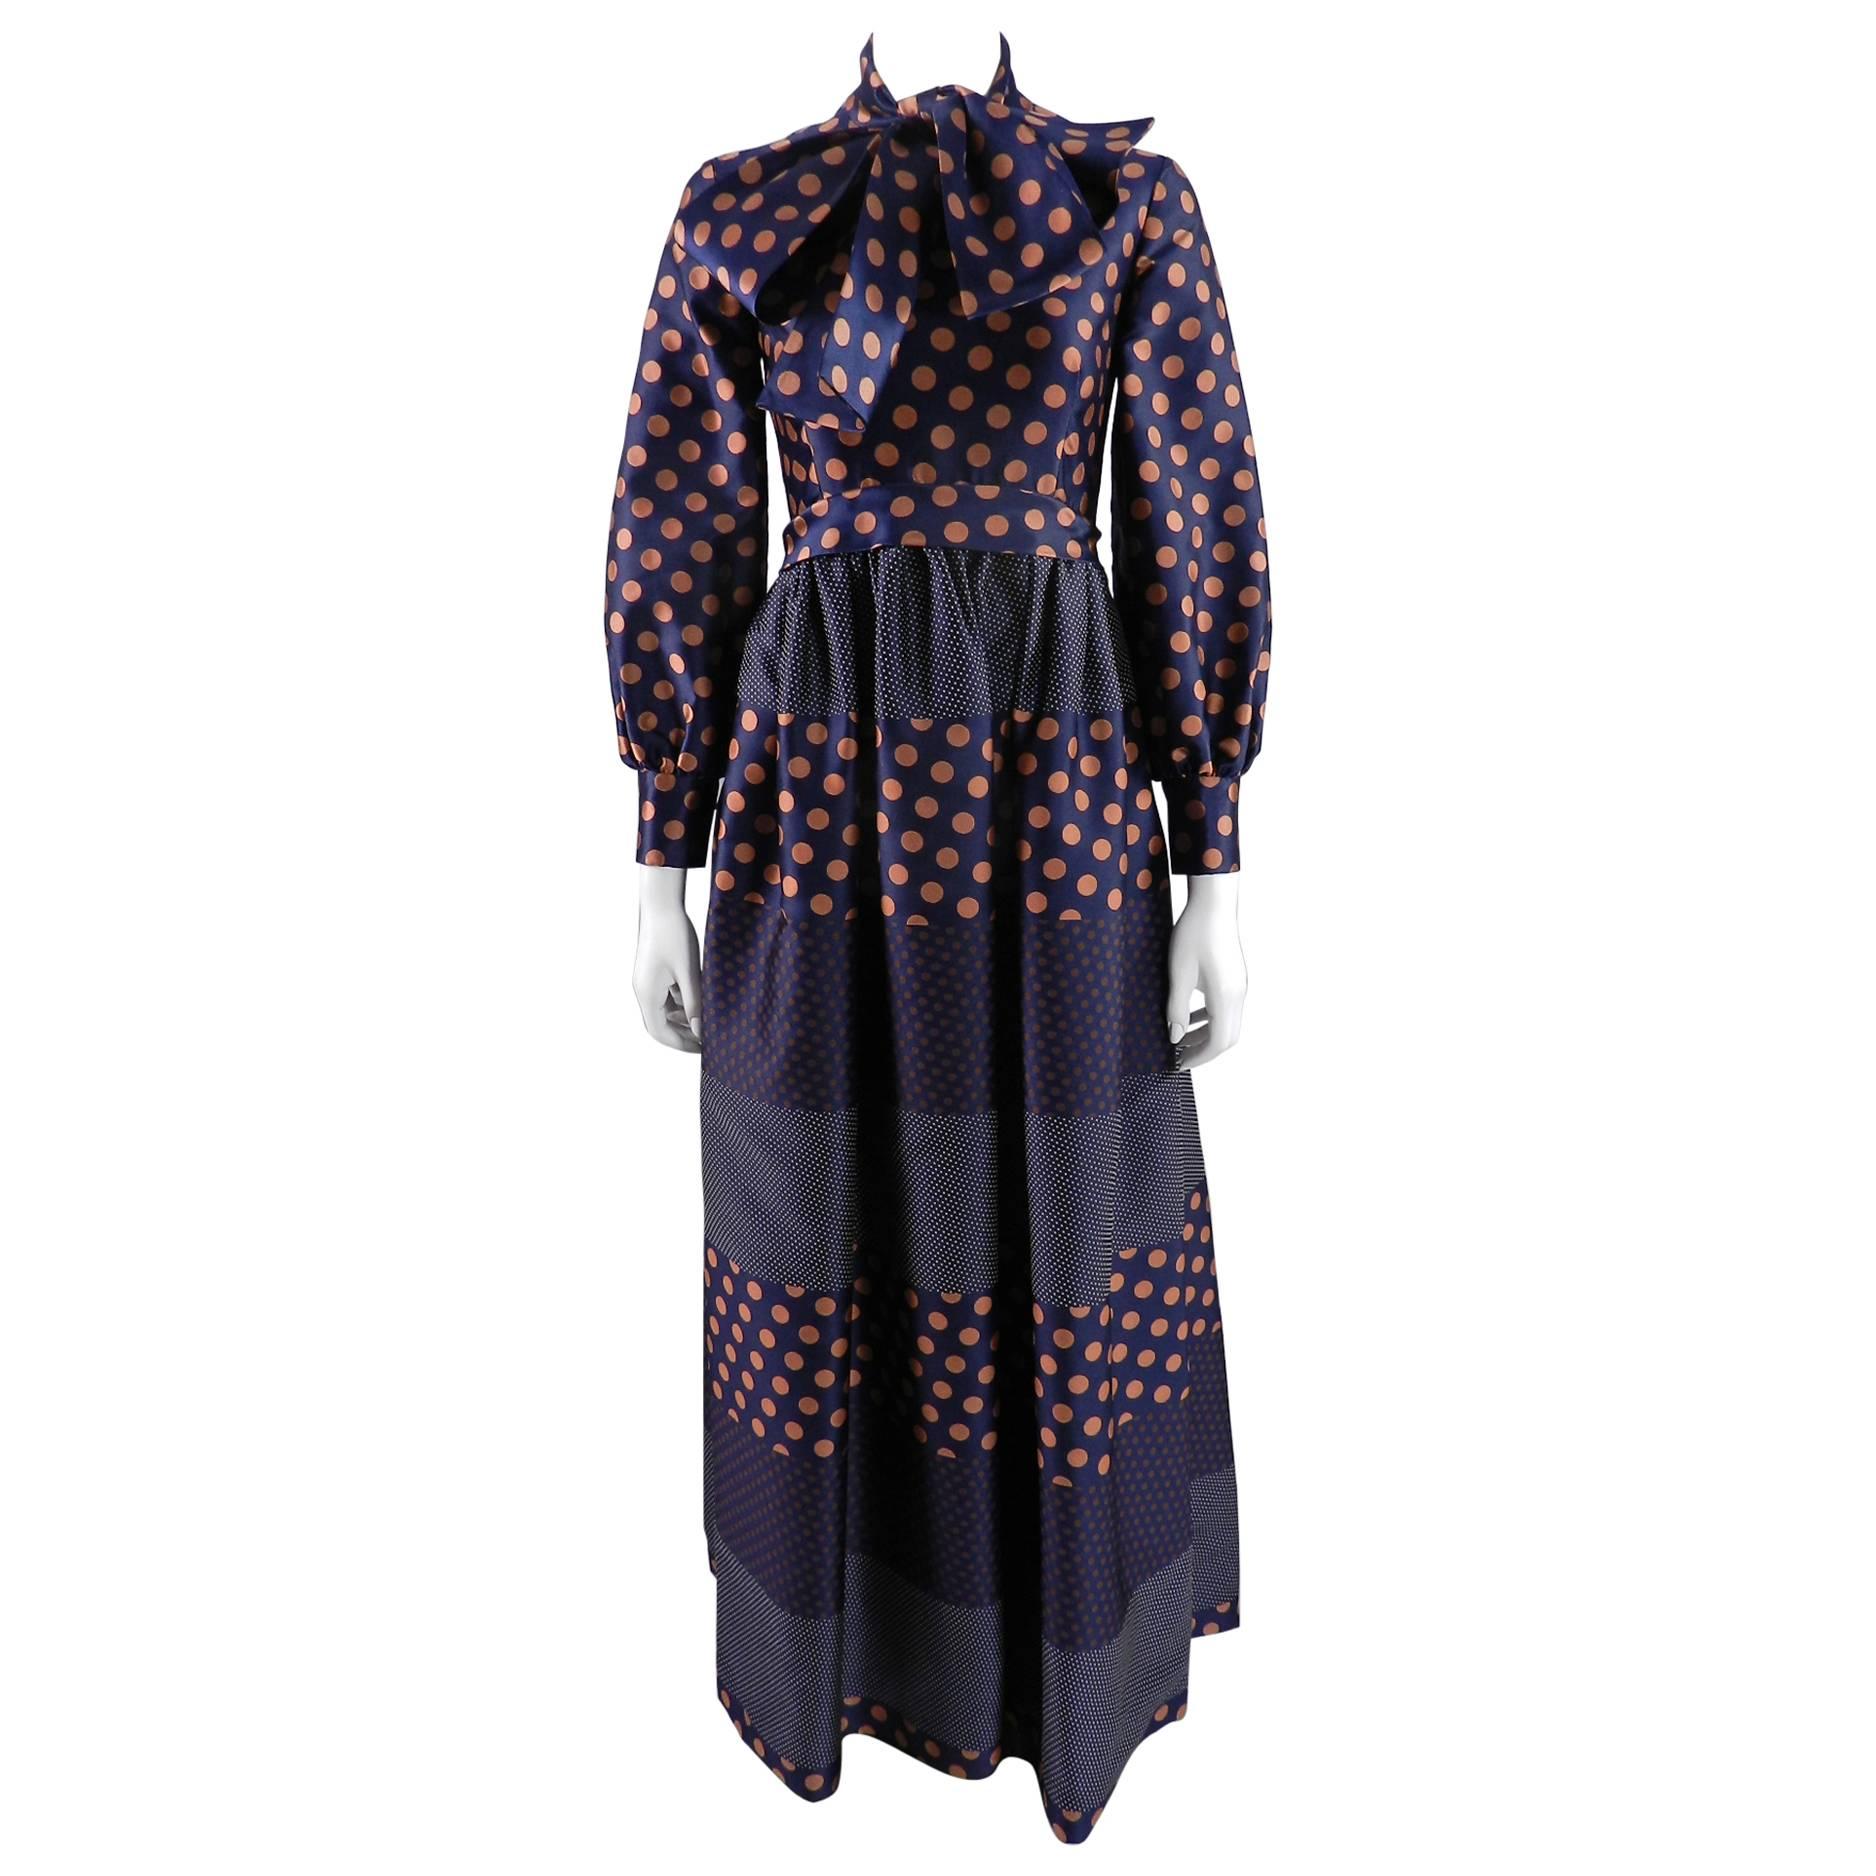 Geoffrey Beene 1970's Polkadot Gown with bow at Neck For Sale